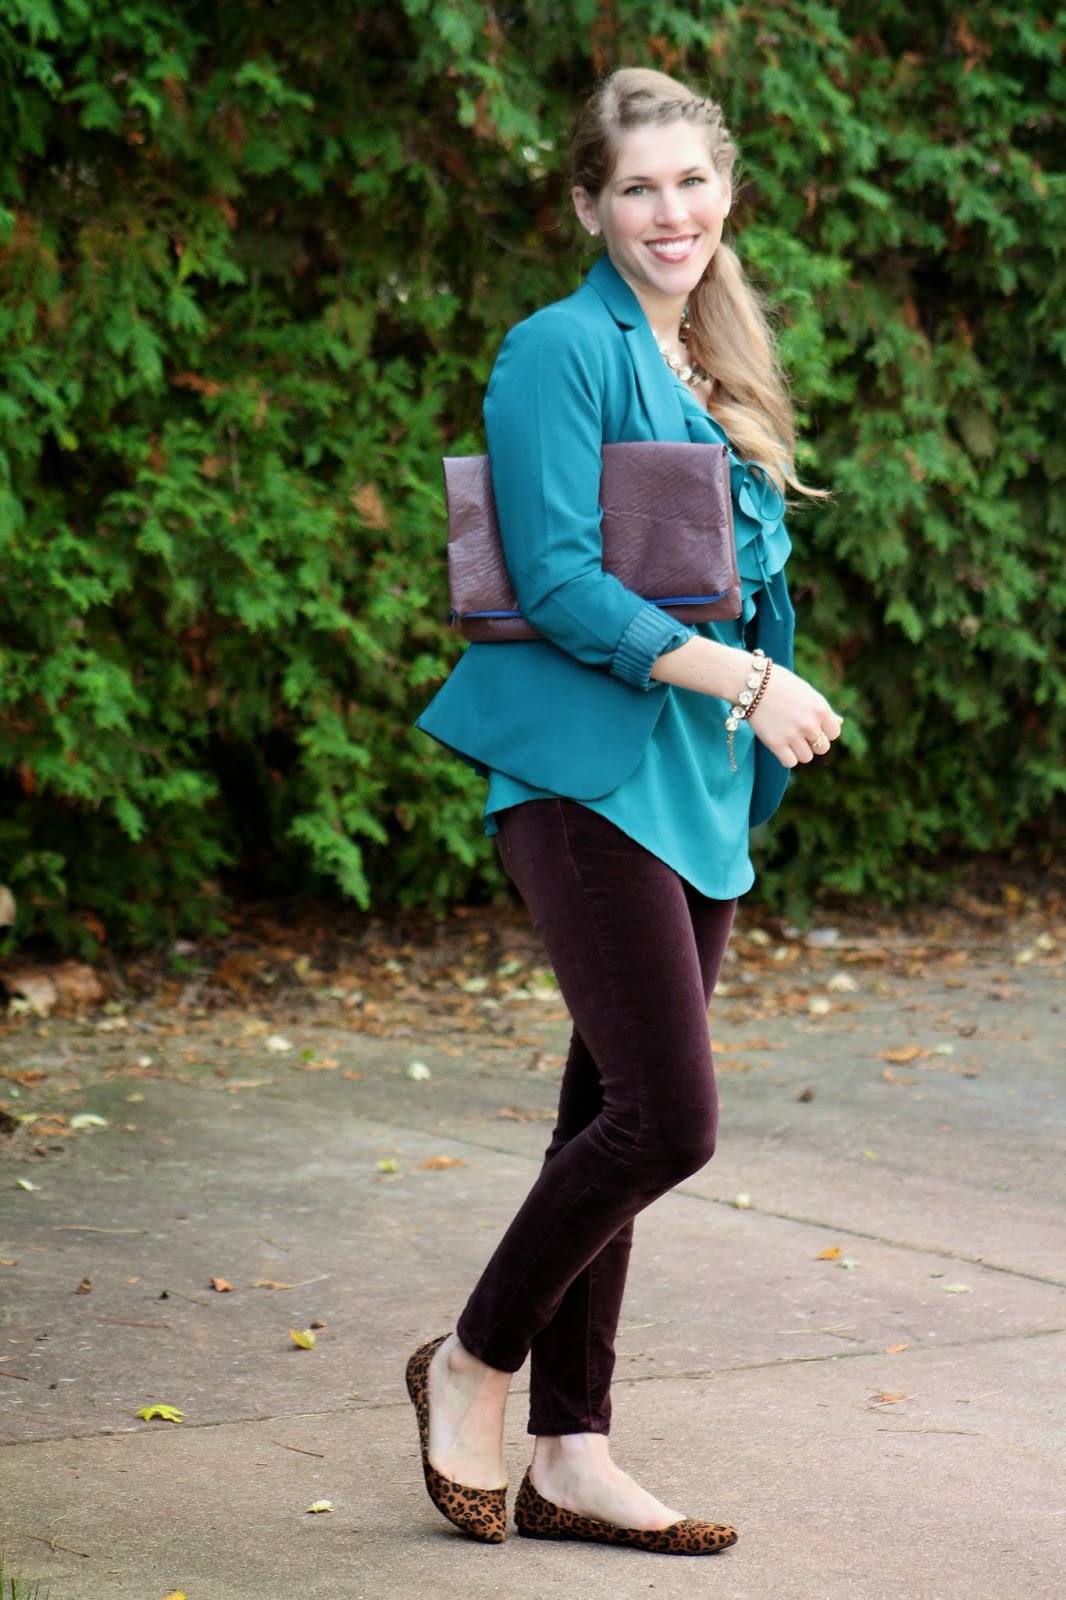 I do deClaire: Teal and Burgundy